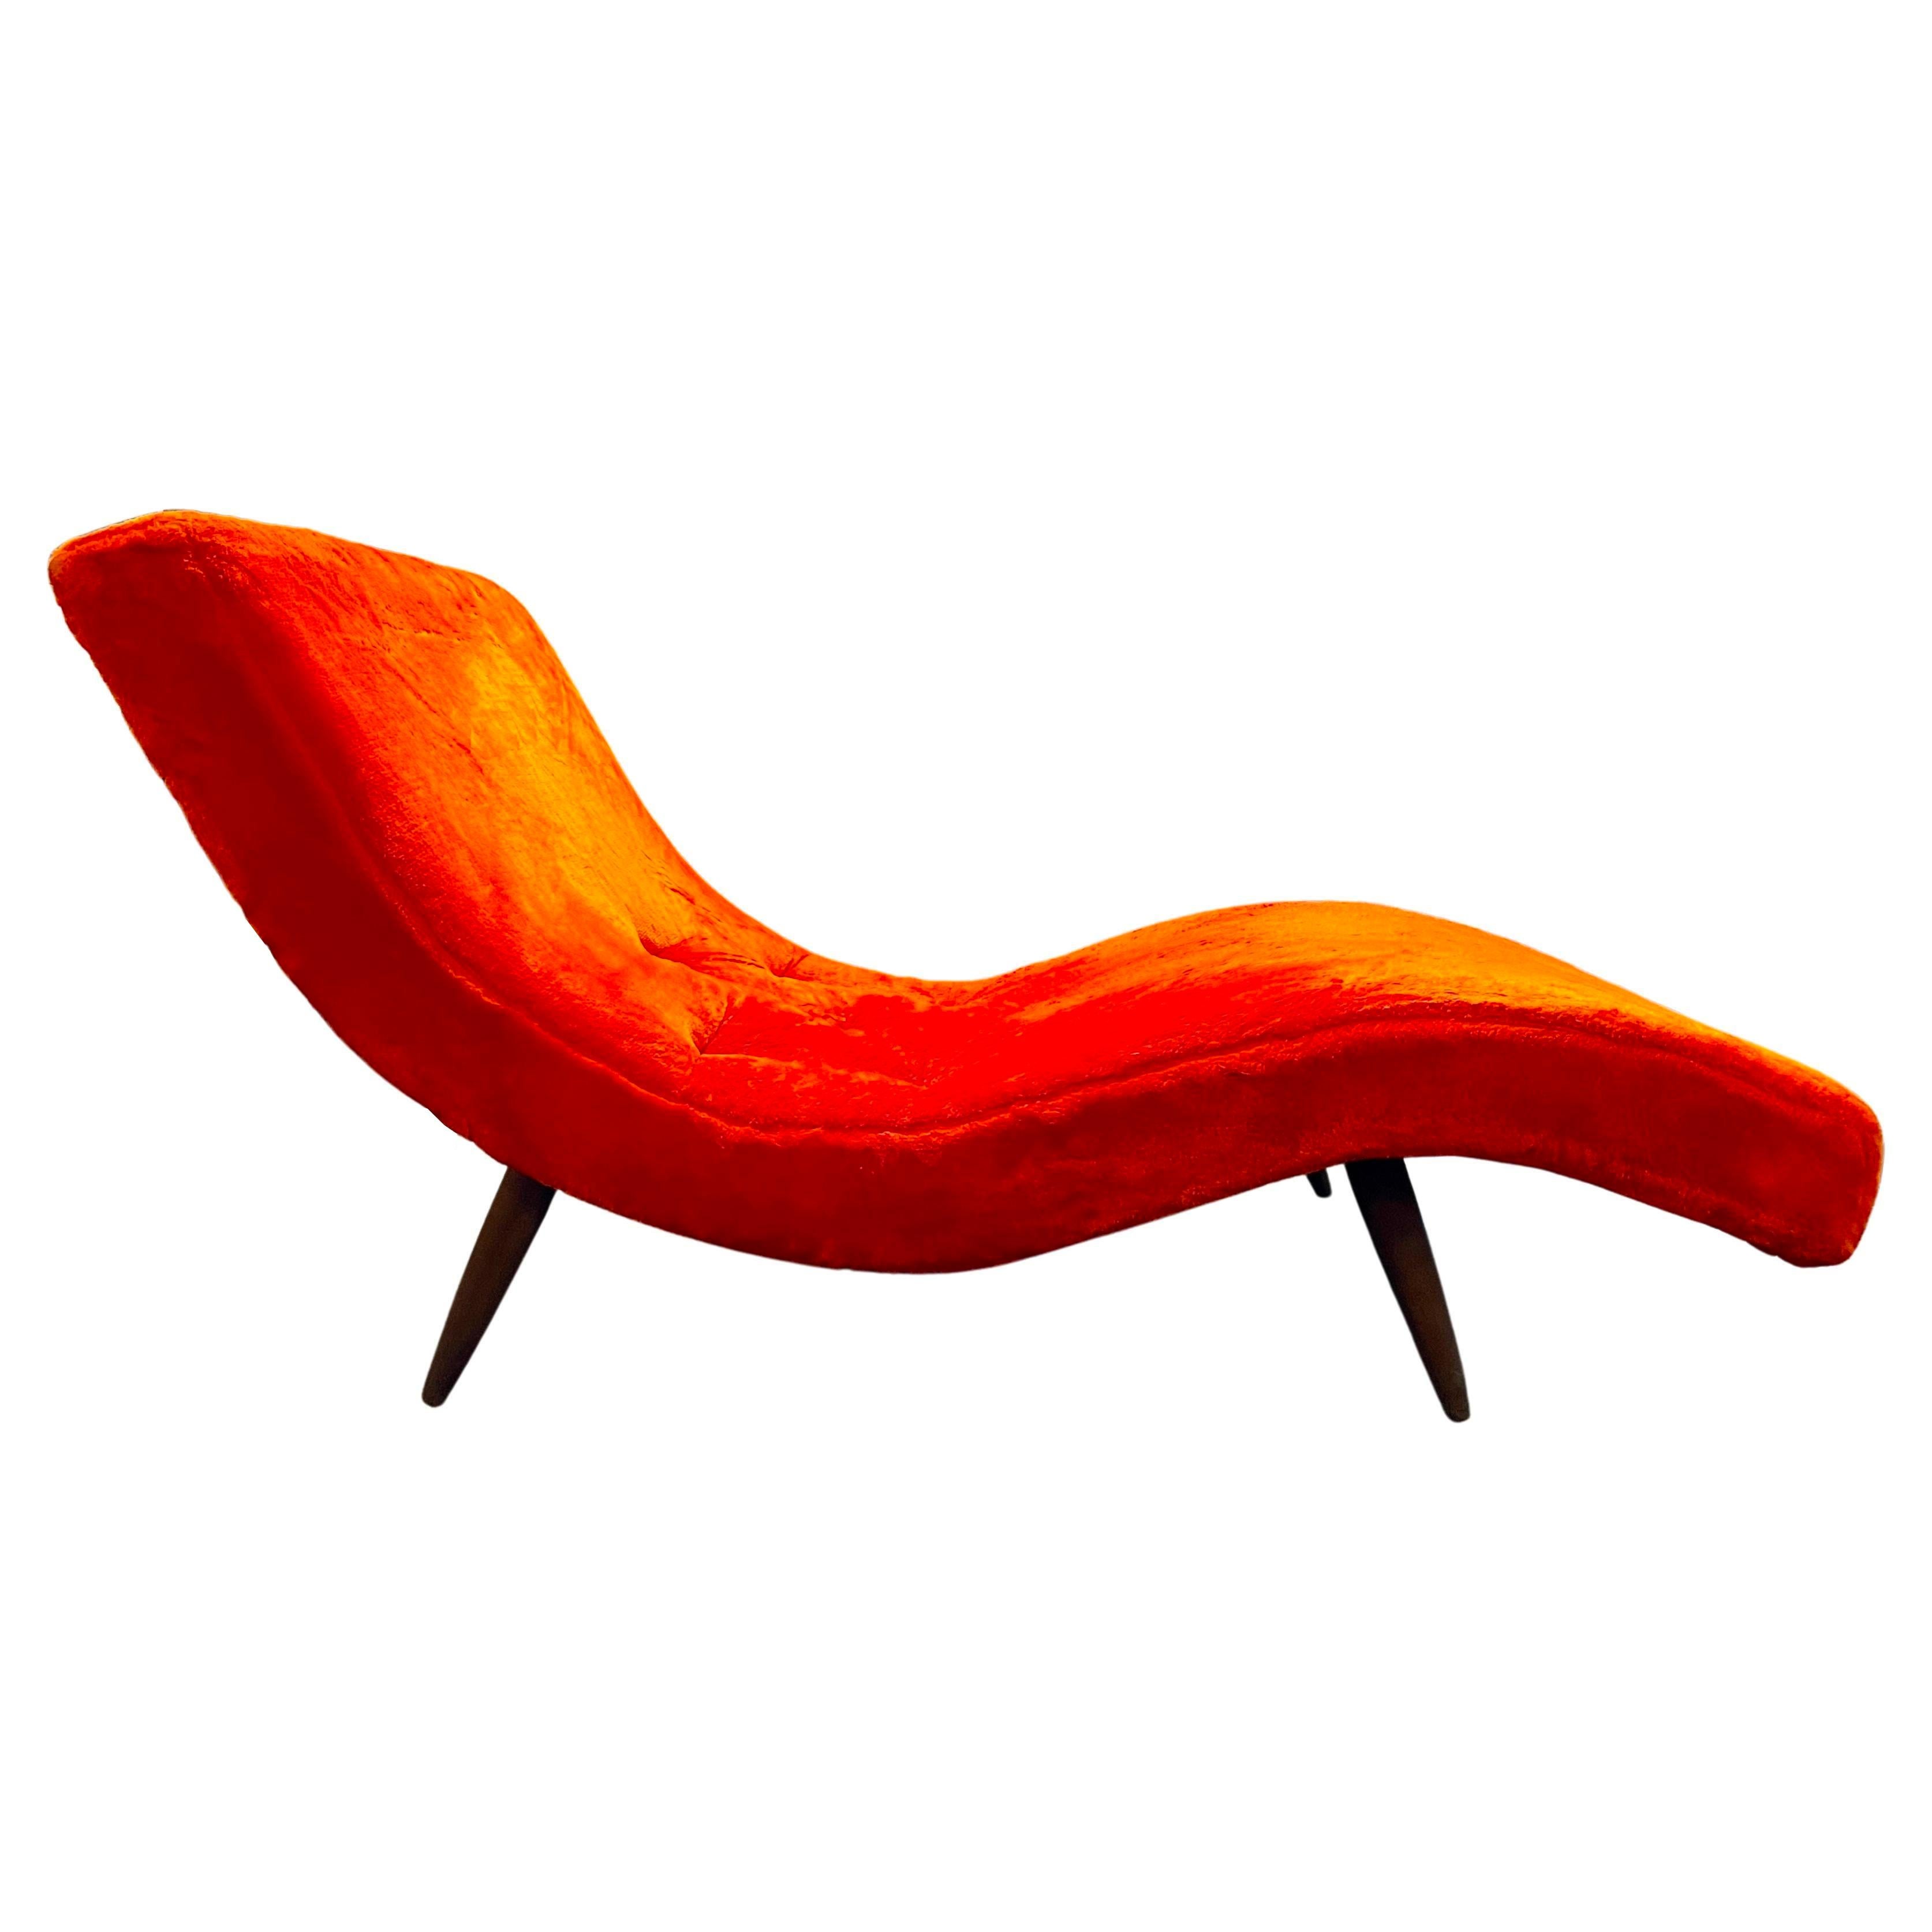 American Adrian Pearsall for Craft Associates Orange Shag Wave Chaise Lounge Chair Mod